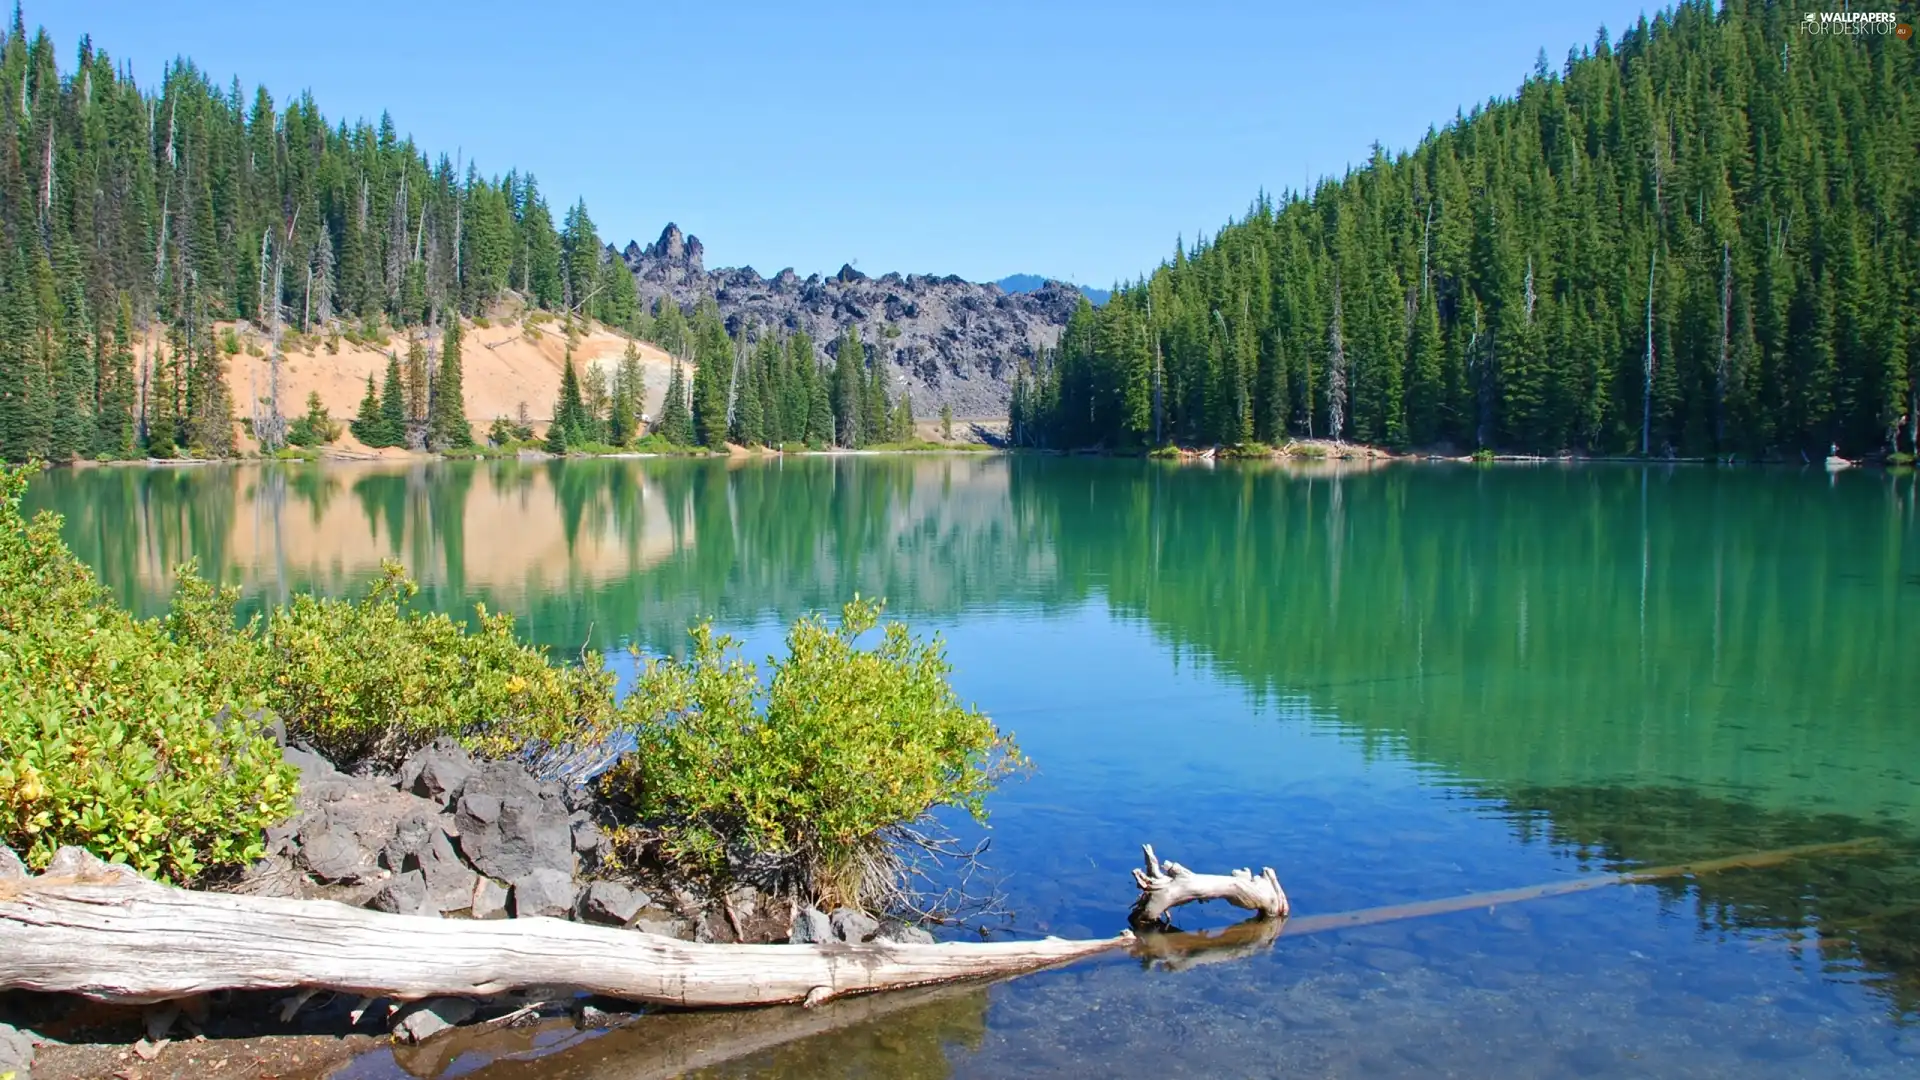 Mountains Forest Coniferous Lake For Desktop Wallpapers 2560x1440